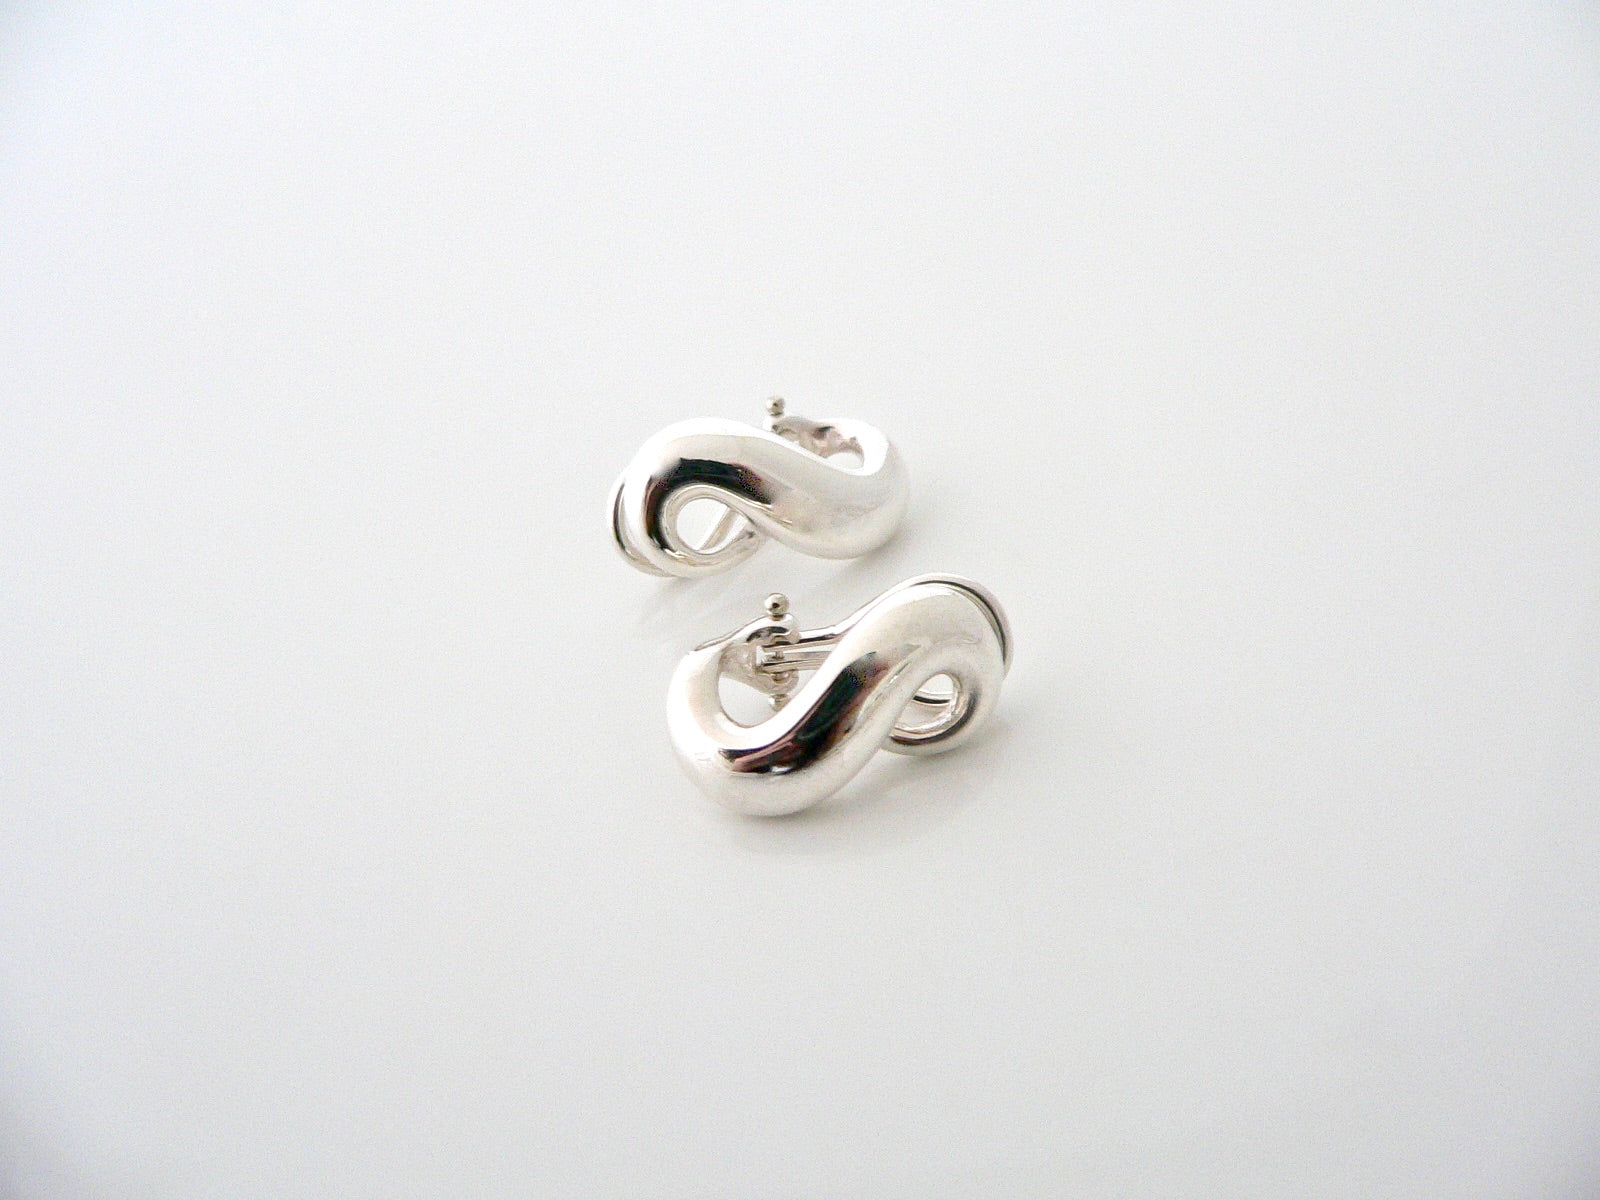 Details more than 74 figure eight earrings best